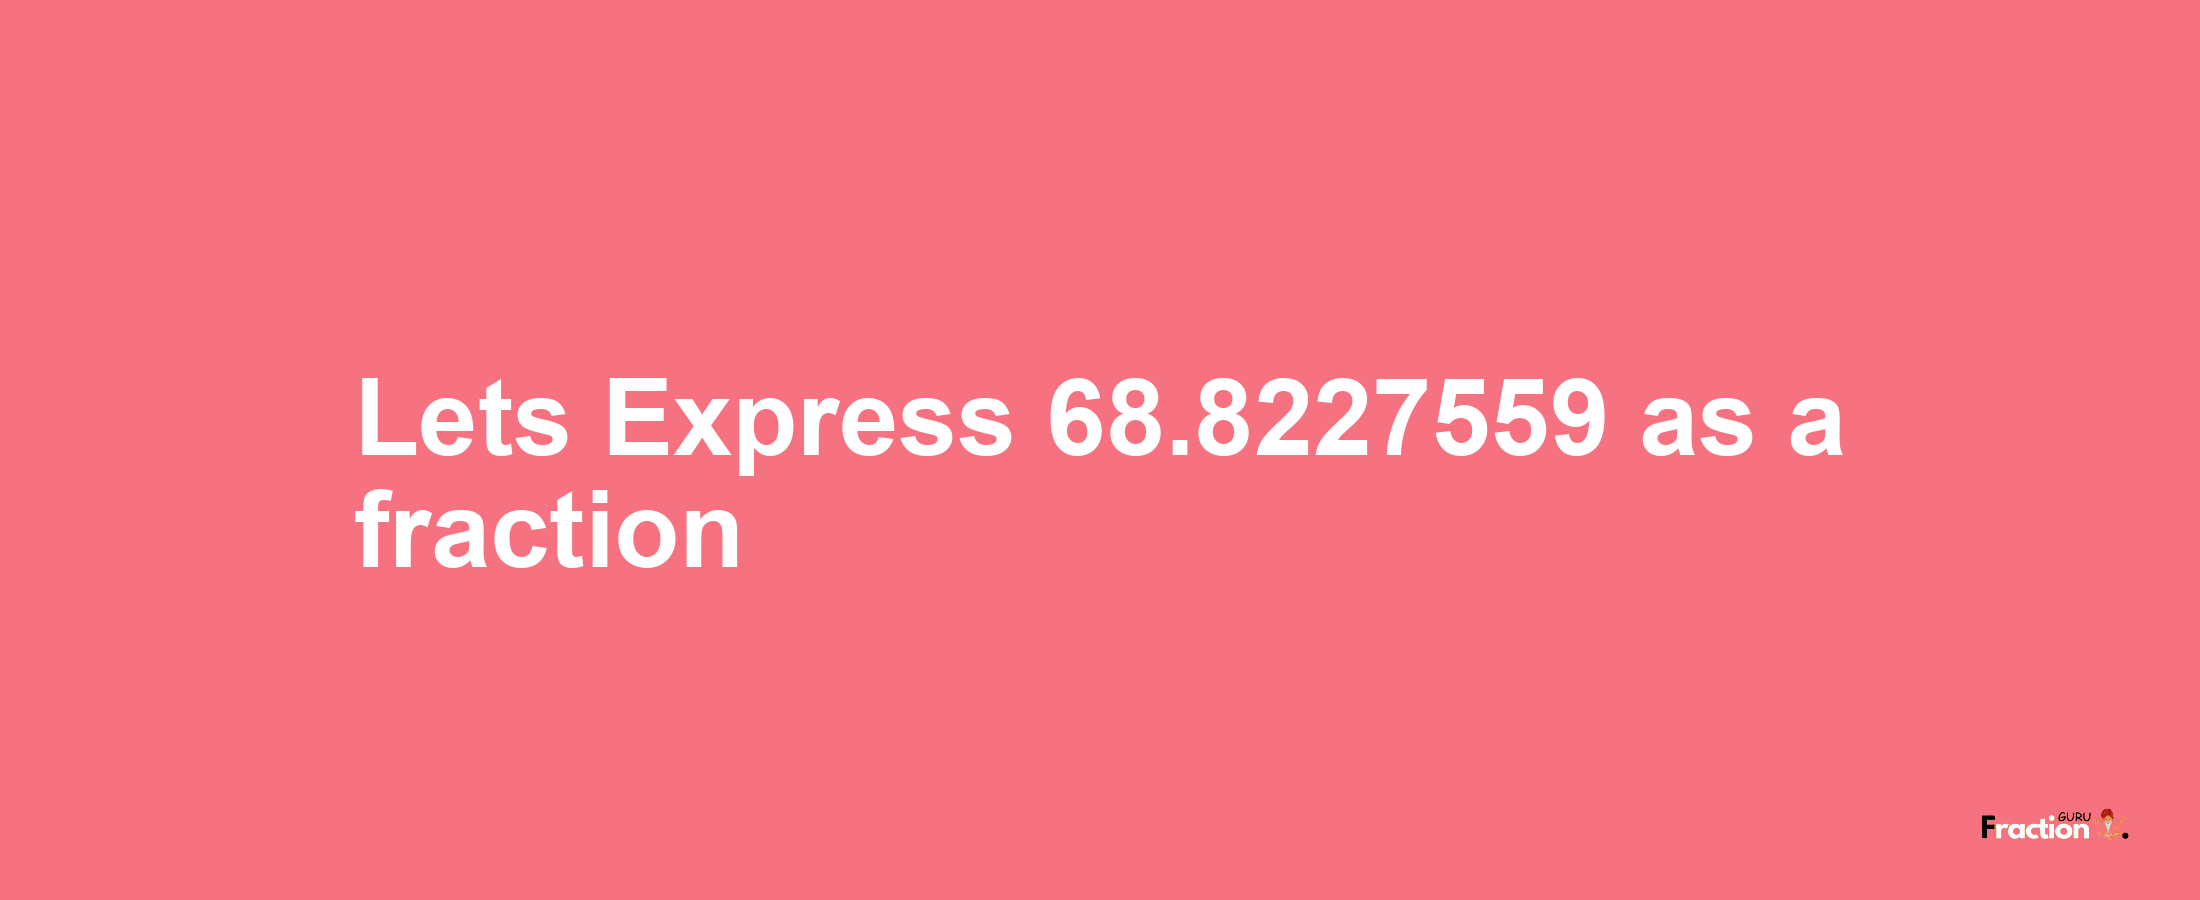 Lets Express 68.8227559 as afraction